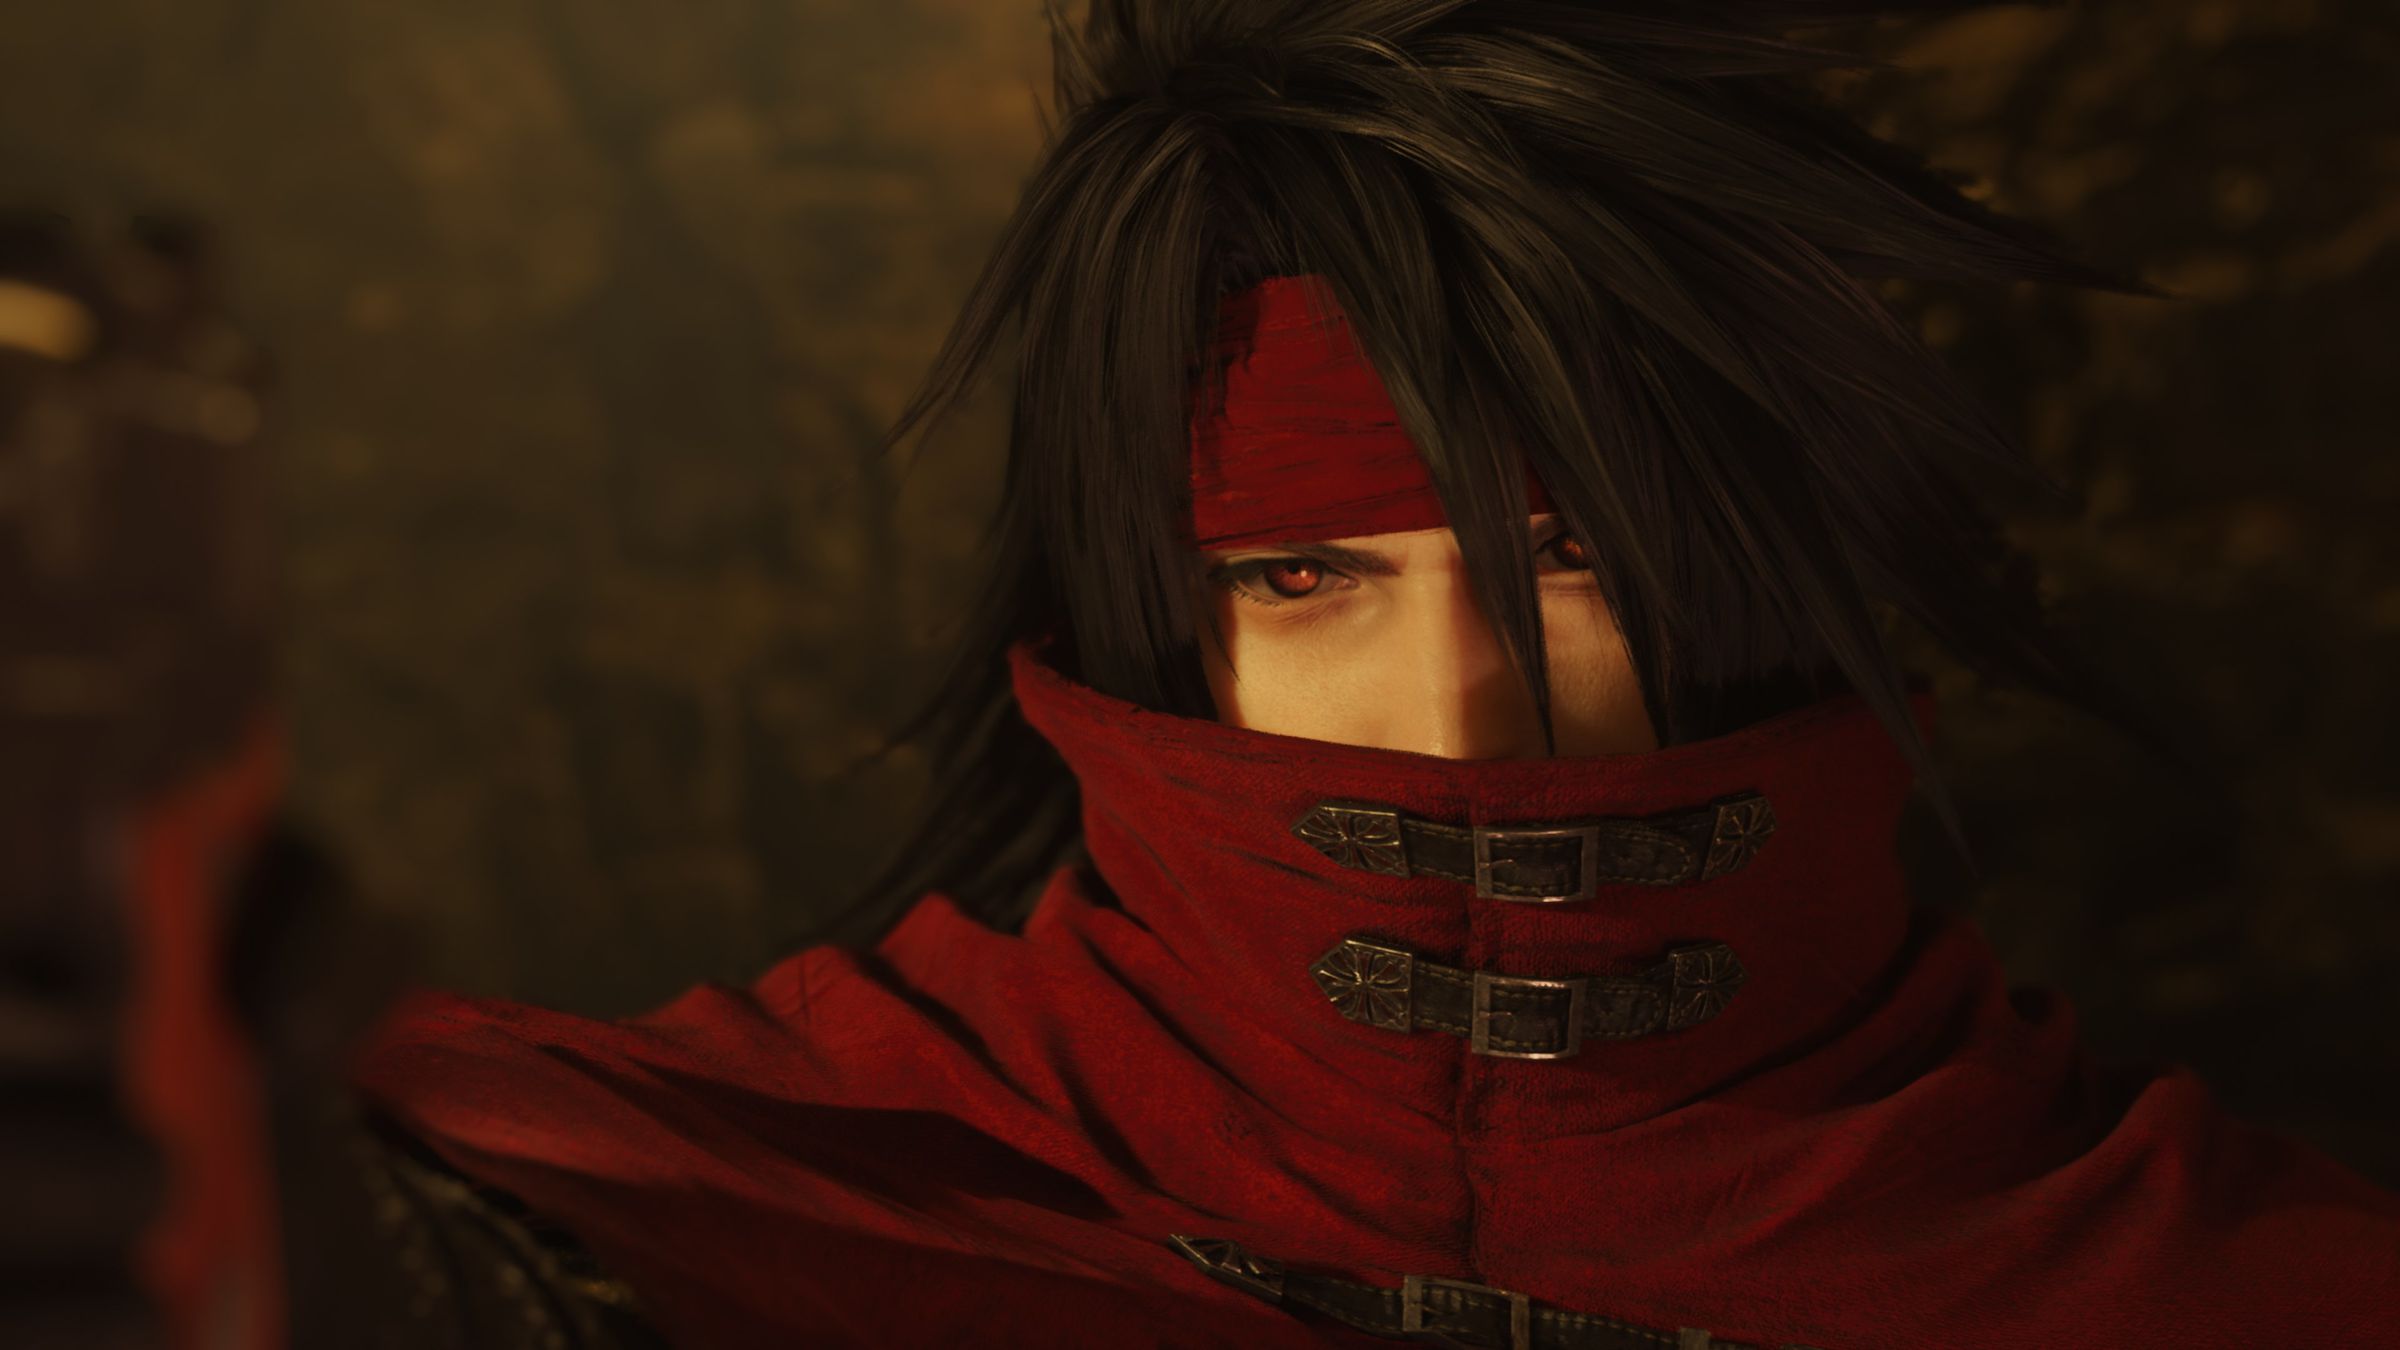 Screenshot from Final Fantasy VII Rebirth featuring a close-up of Vincent Valentine, a light-skinned man with black hair, red eyes, and a deep red cowl that covers half his face.